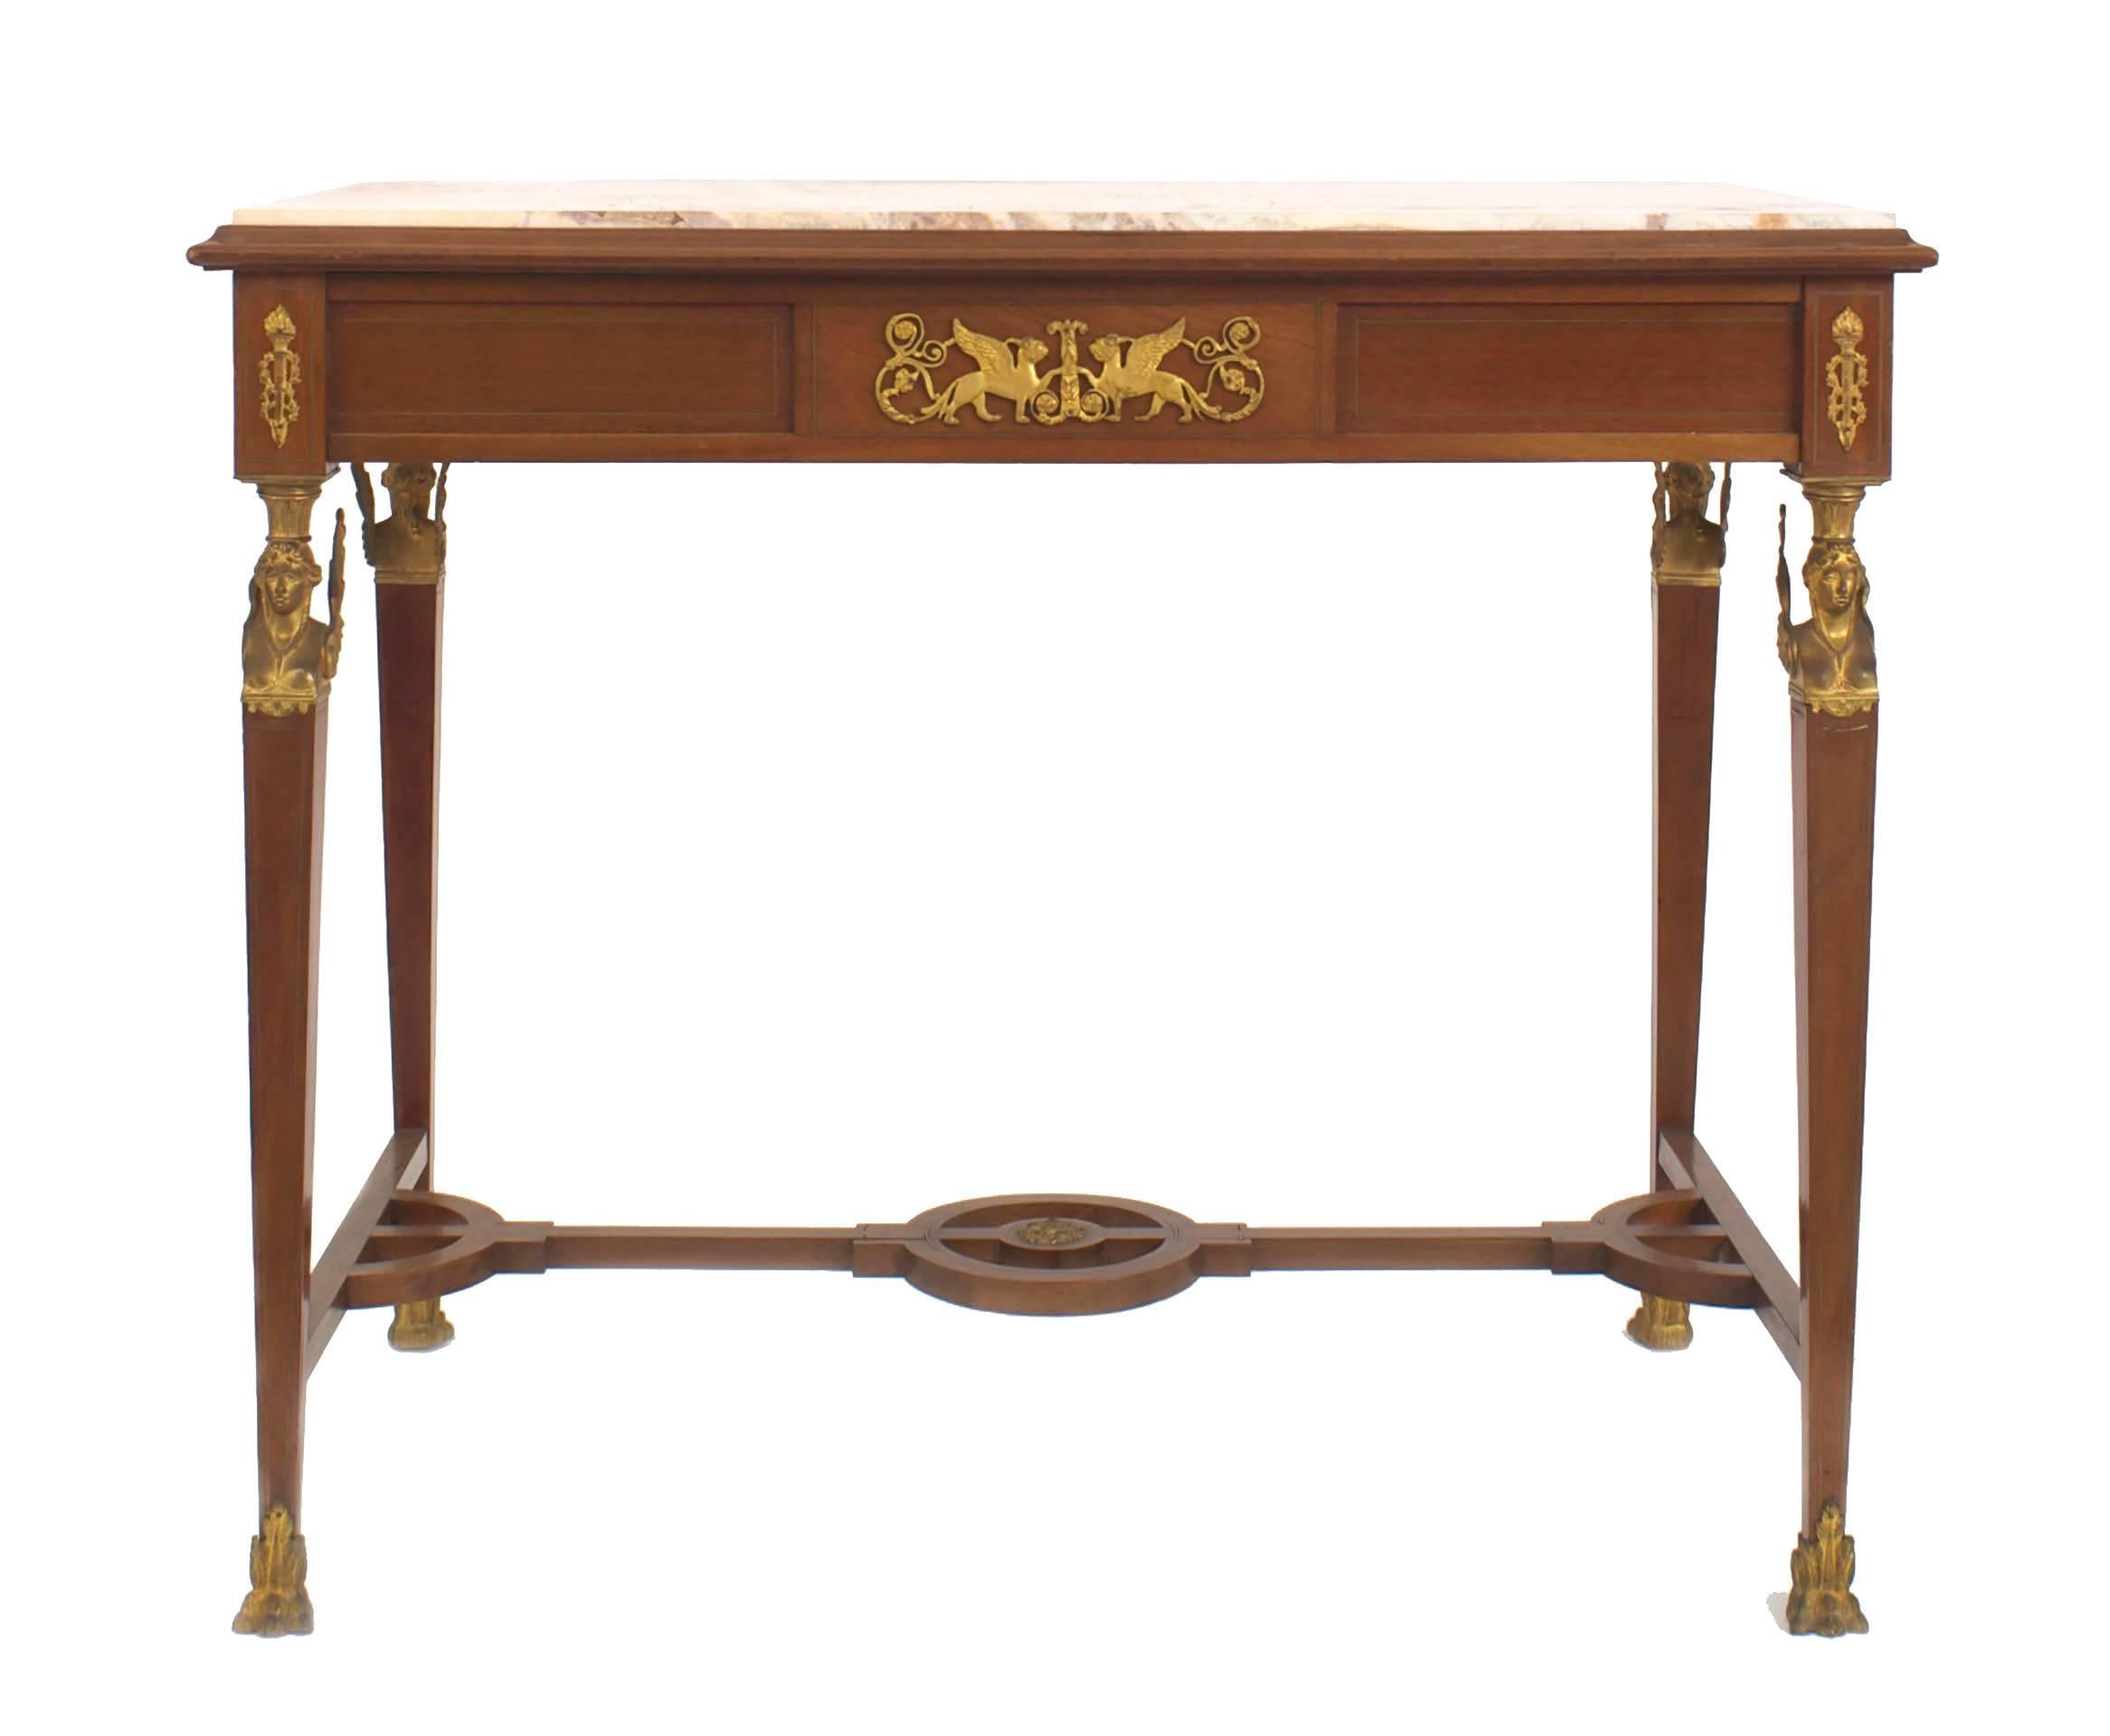 French Empire style (19th centntury) mahogany and bronze trimmed rectangular centre table with winged females, open stretcher and onyx top.